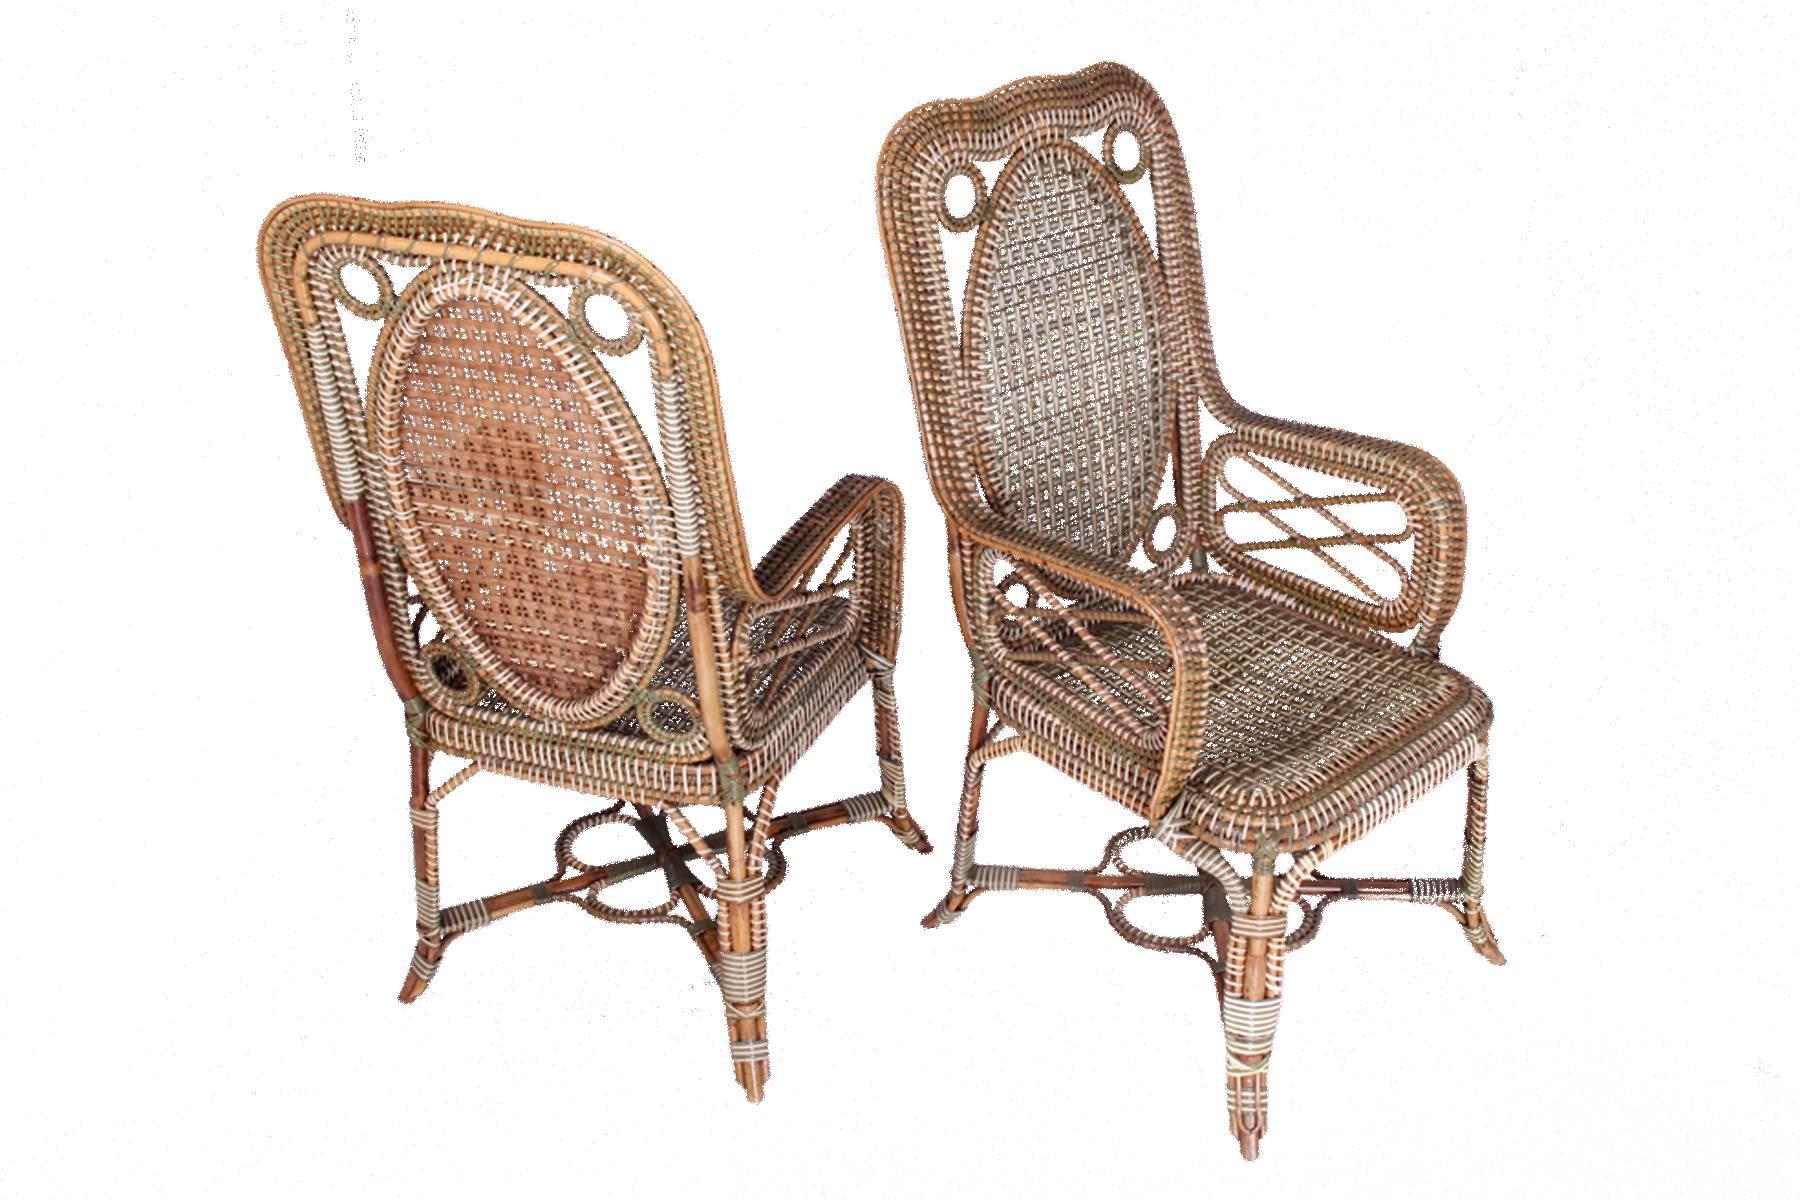 Rattan Set of Winter Garden Furniture by Perret et Vibert, France, End of 19th Century